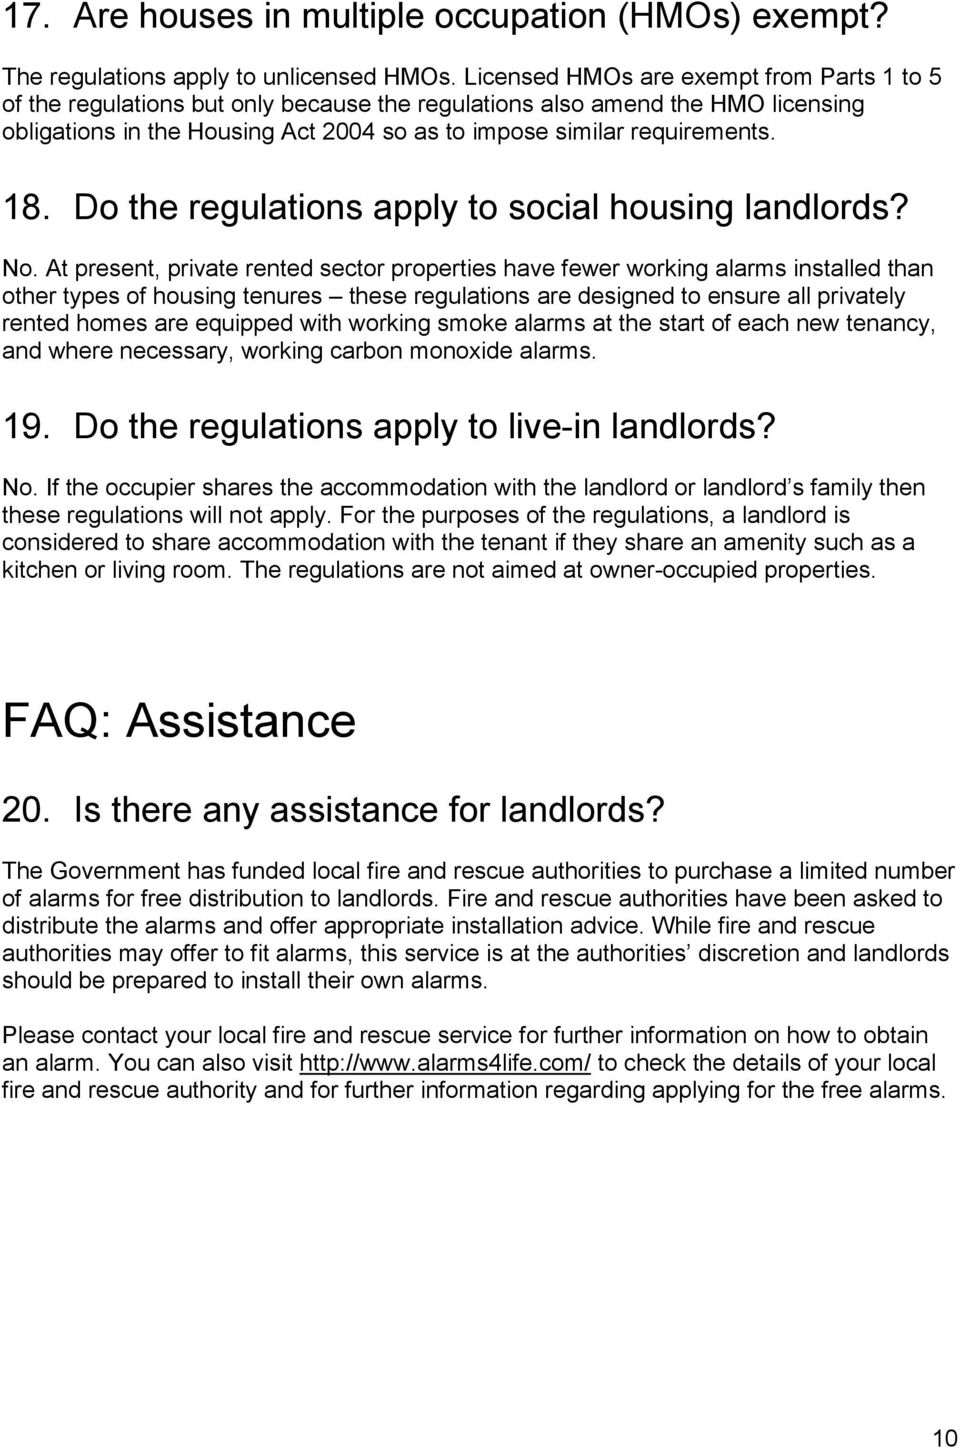 18. Do the regulations apply to social housing landlords? No.